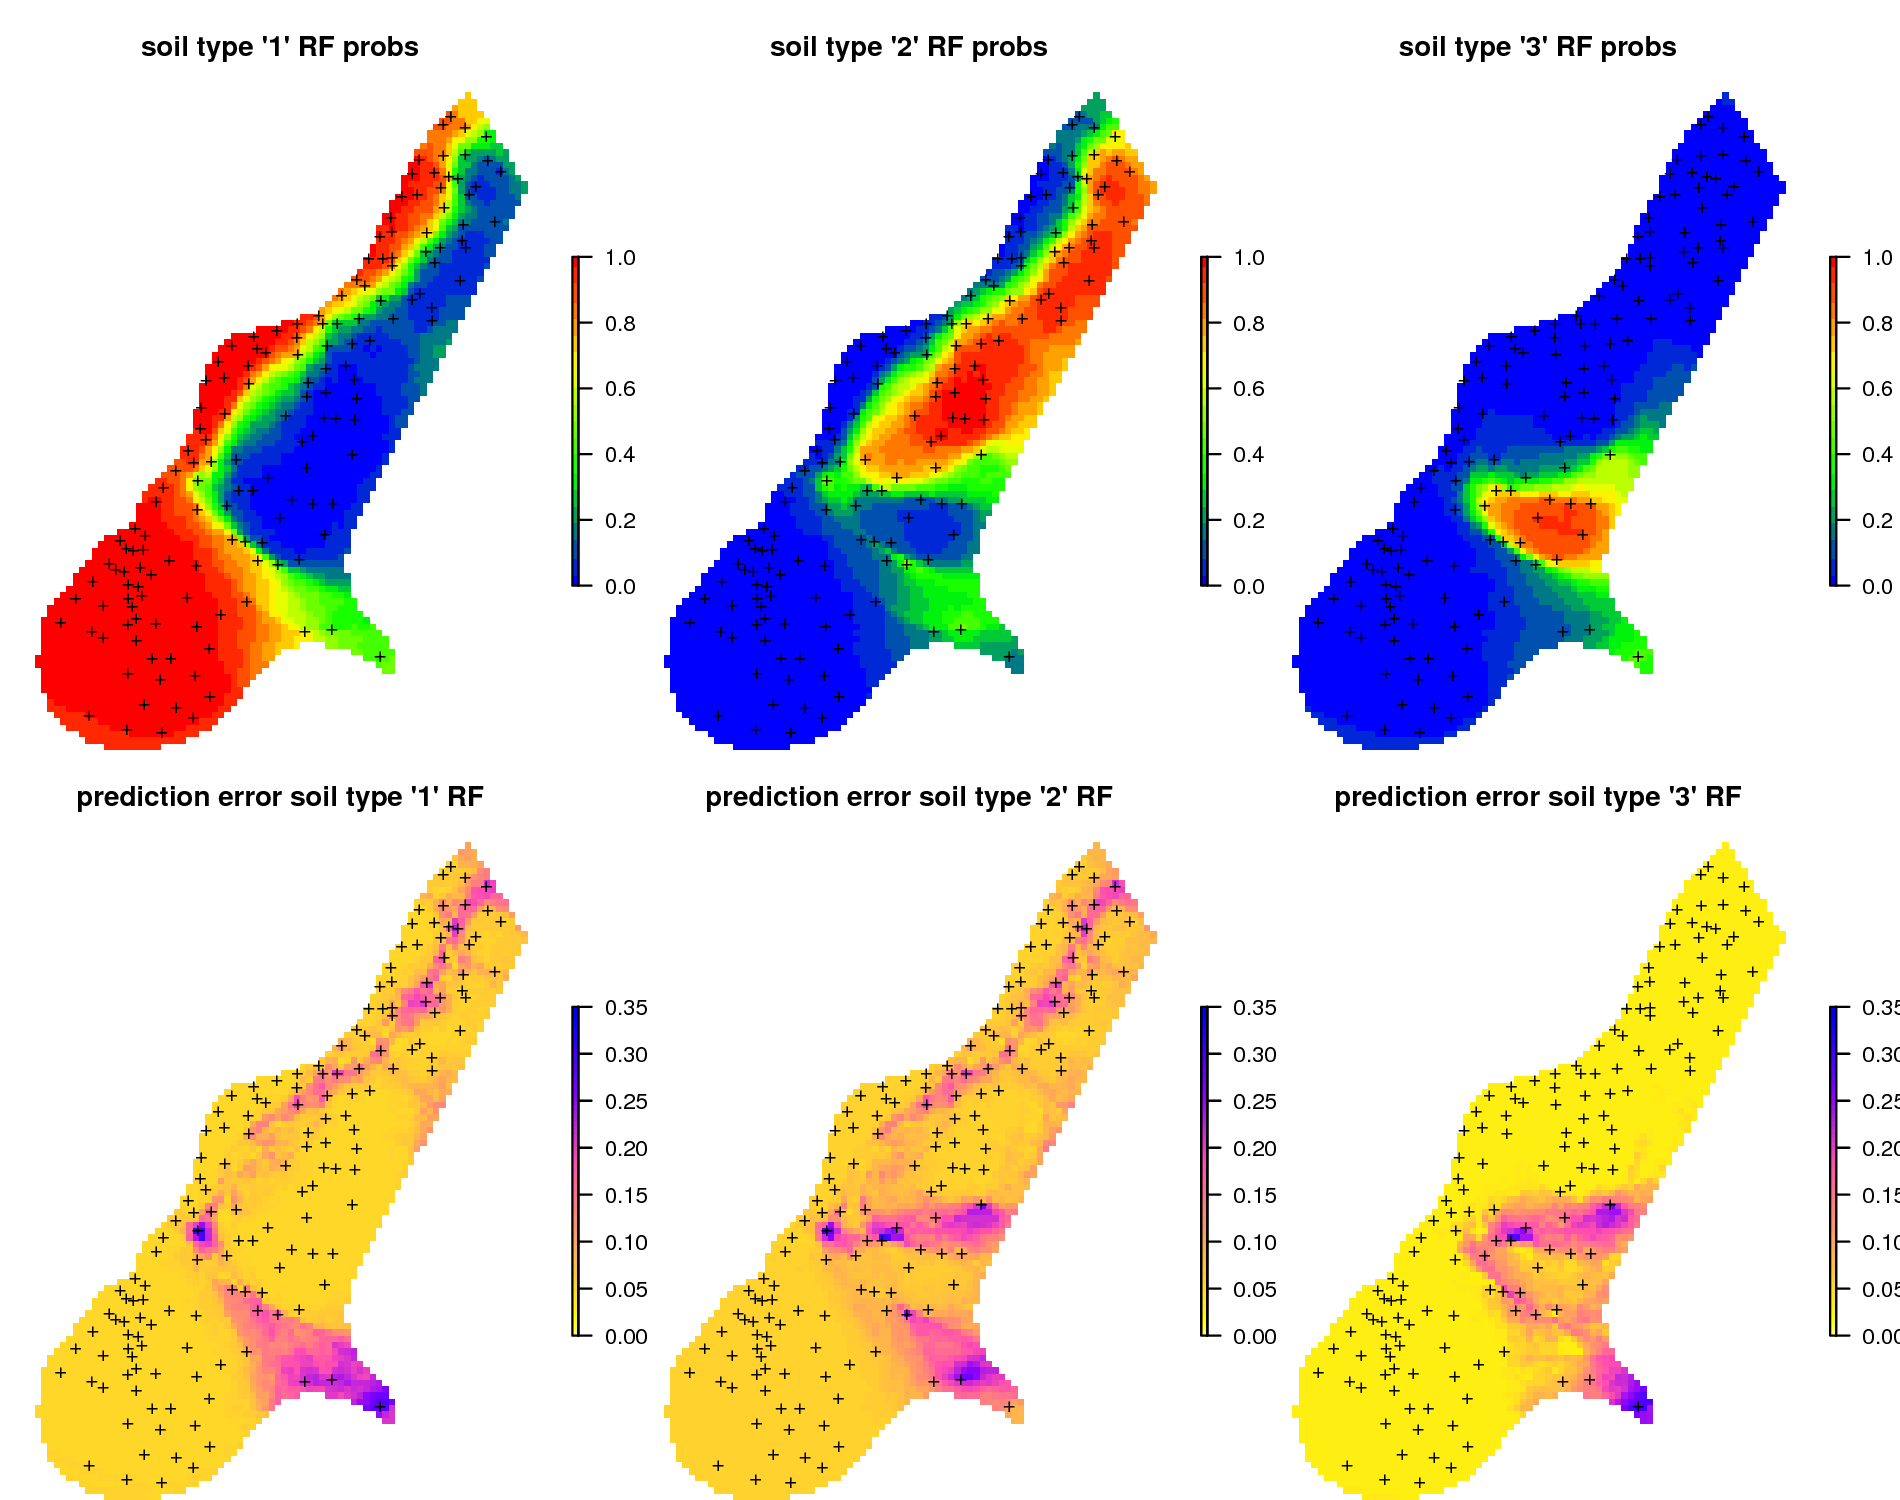 Predictions of soil types for the meuse data set based on the RFsp: (above) probability for three soil classes, and (below) derived standard errors per class.